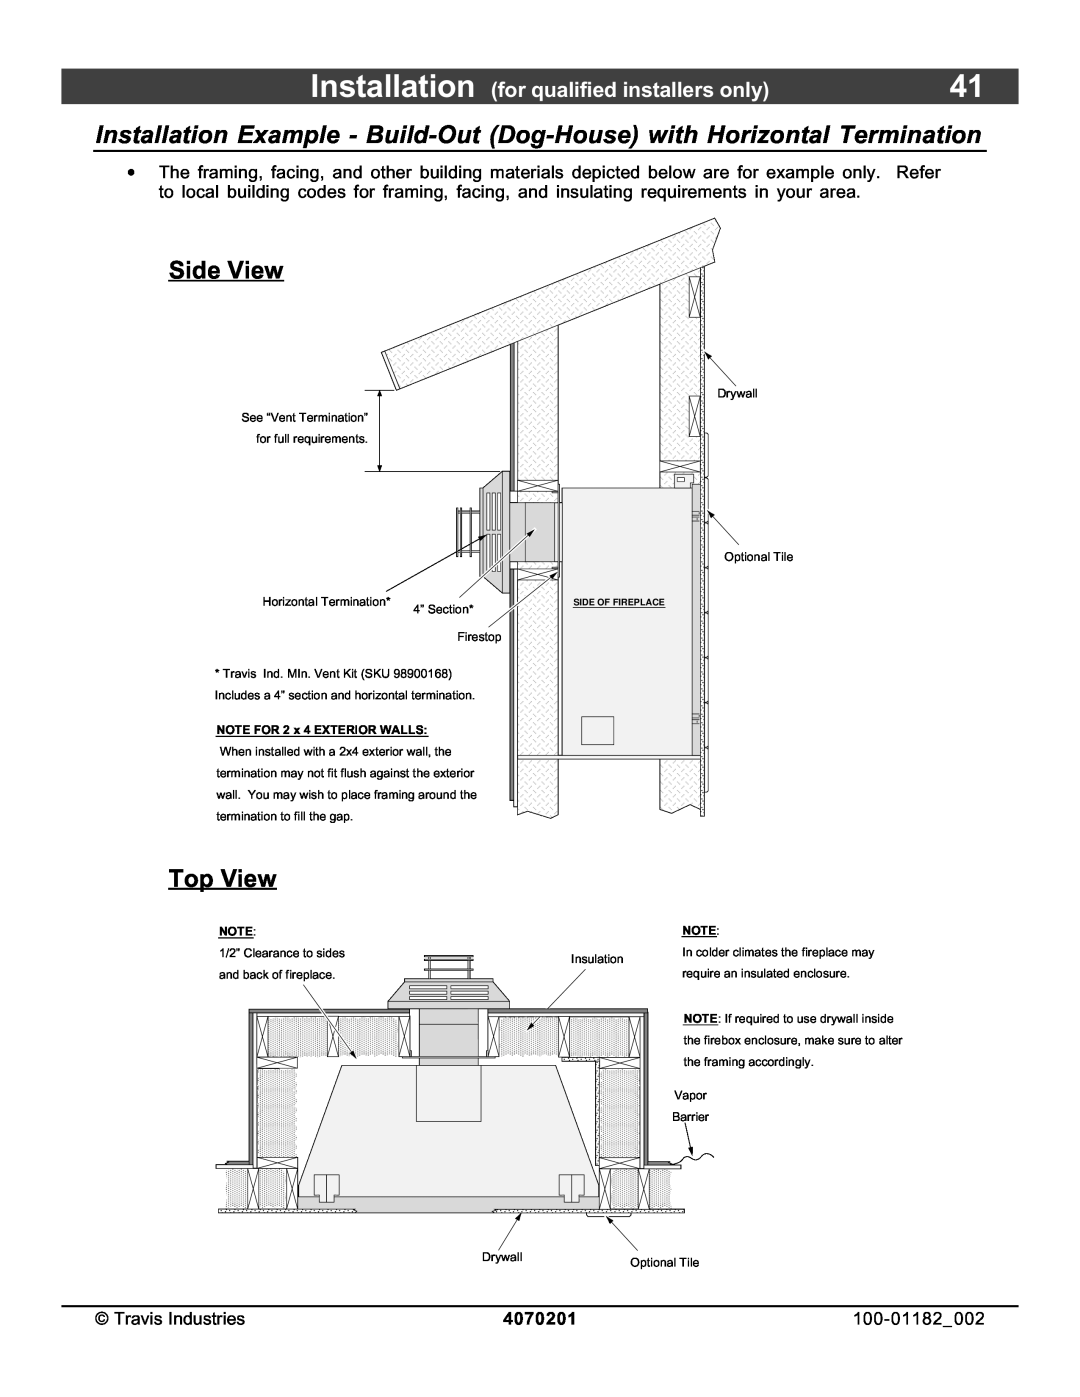 North Star 864 HH Side View, Top View, Installation for qualified installers only, 4070201, NOTE FOR 2 x 4 EXTERIOR WALLS 